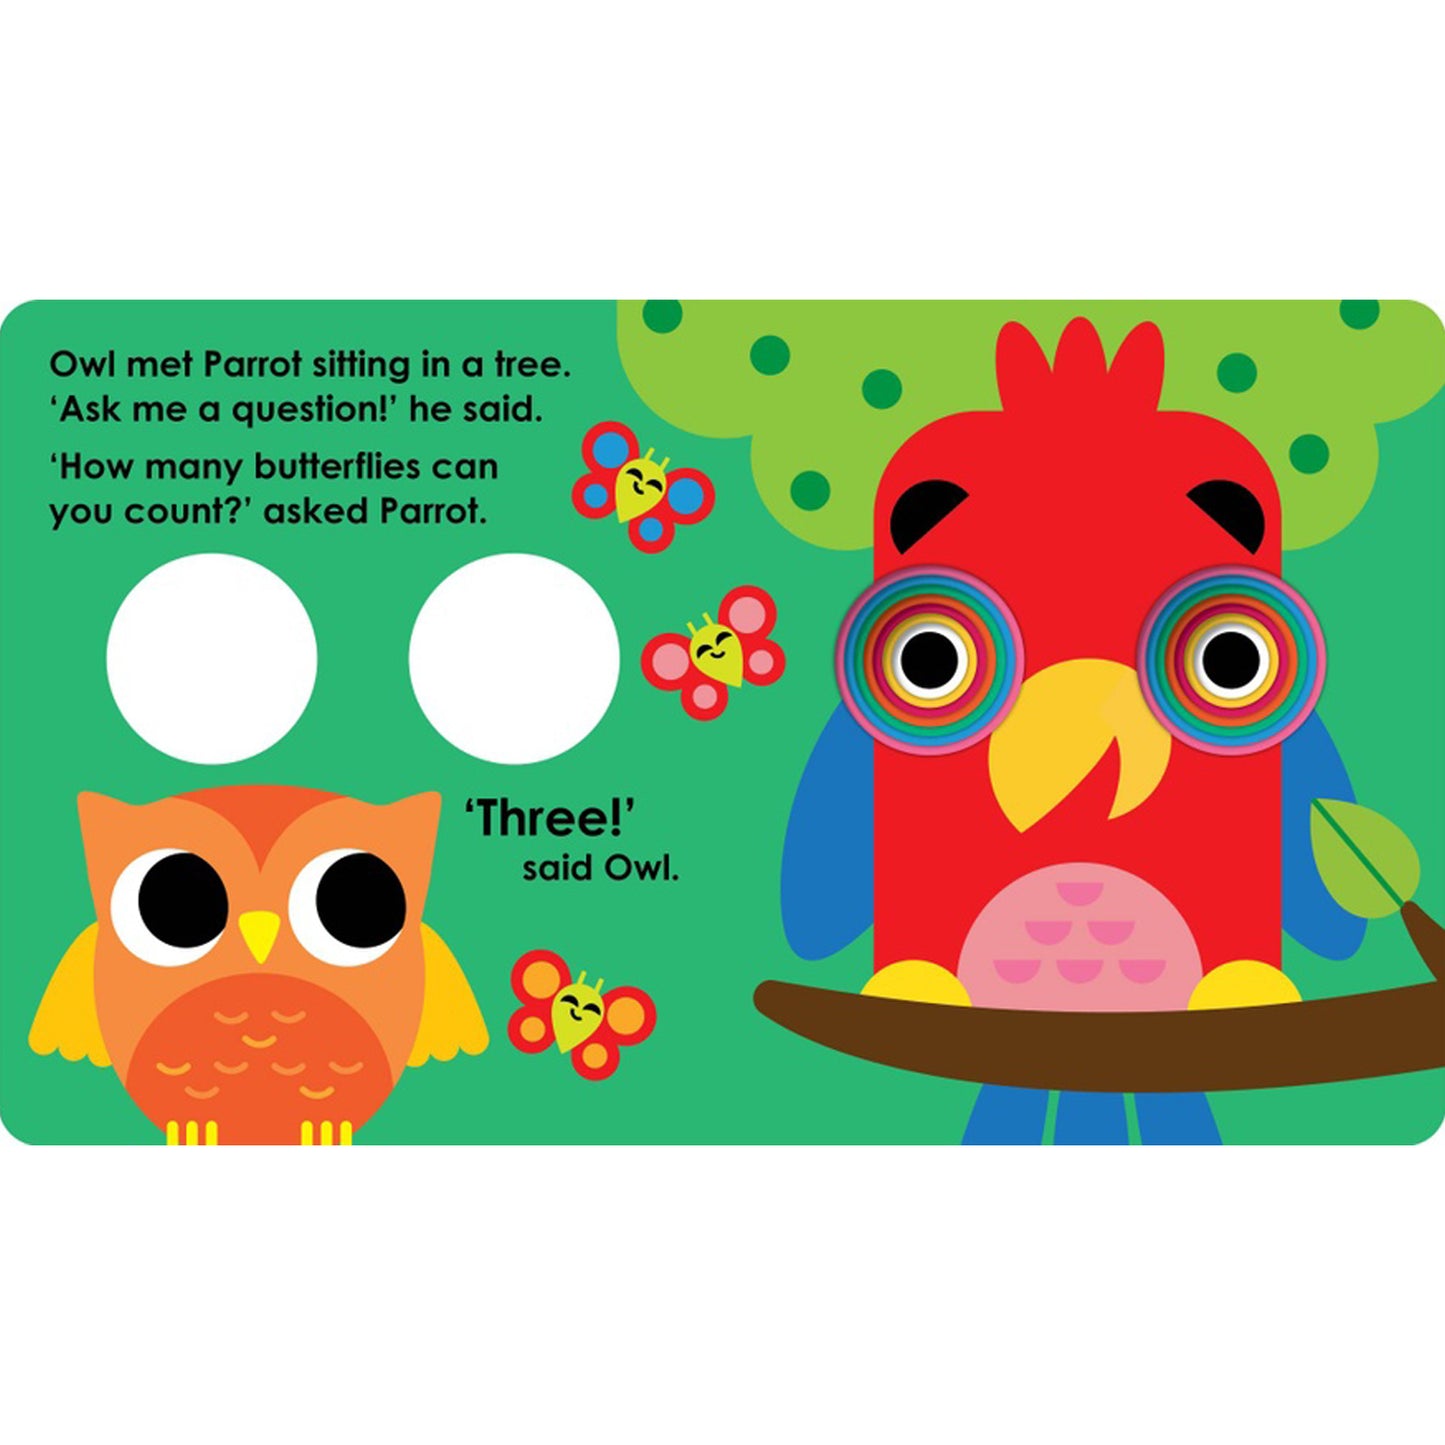 Graduating Board Book – The Wise Owl  | Children's books about birds | Early learning books | Board books | Die cut board books [Board book] Parragon